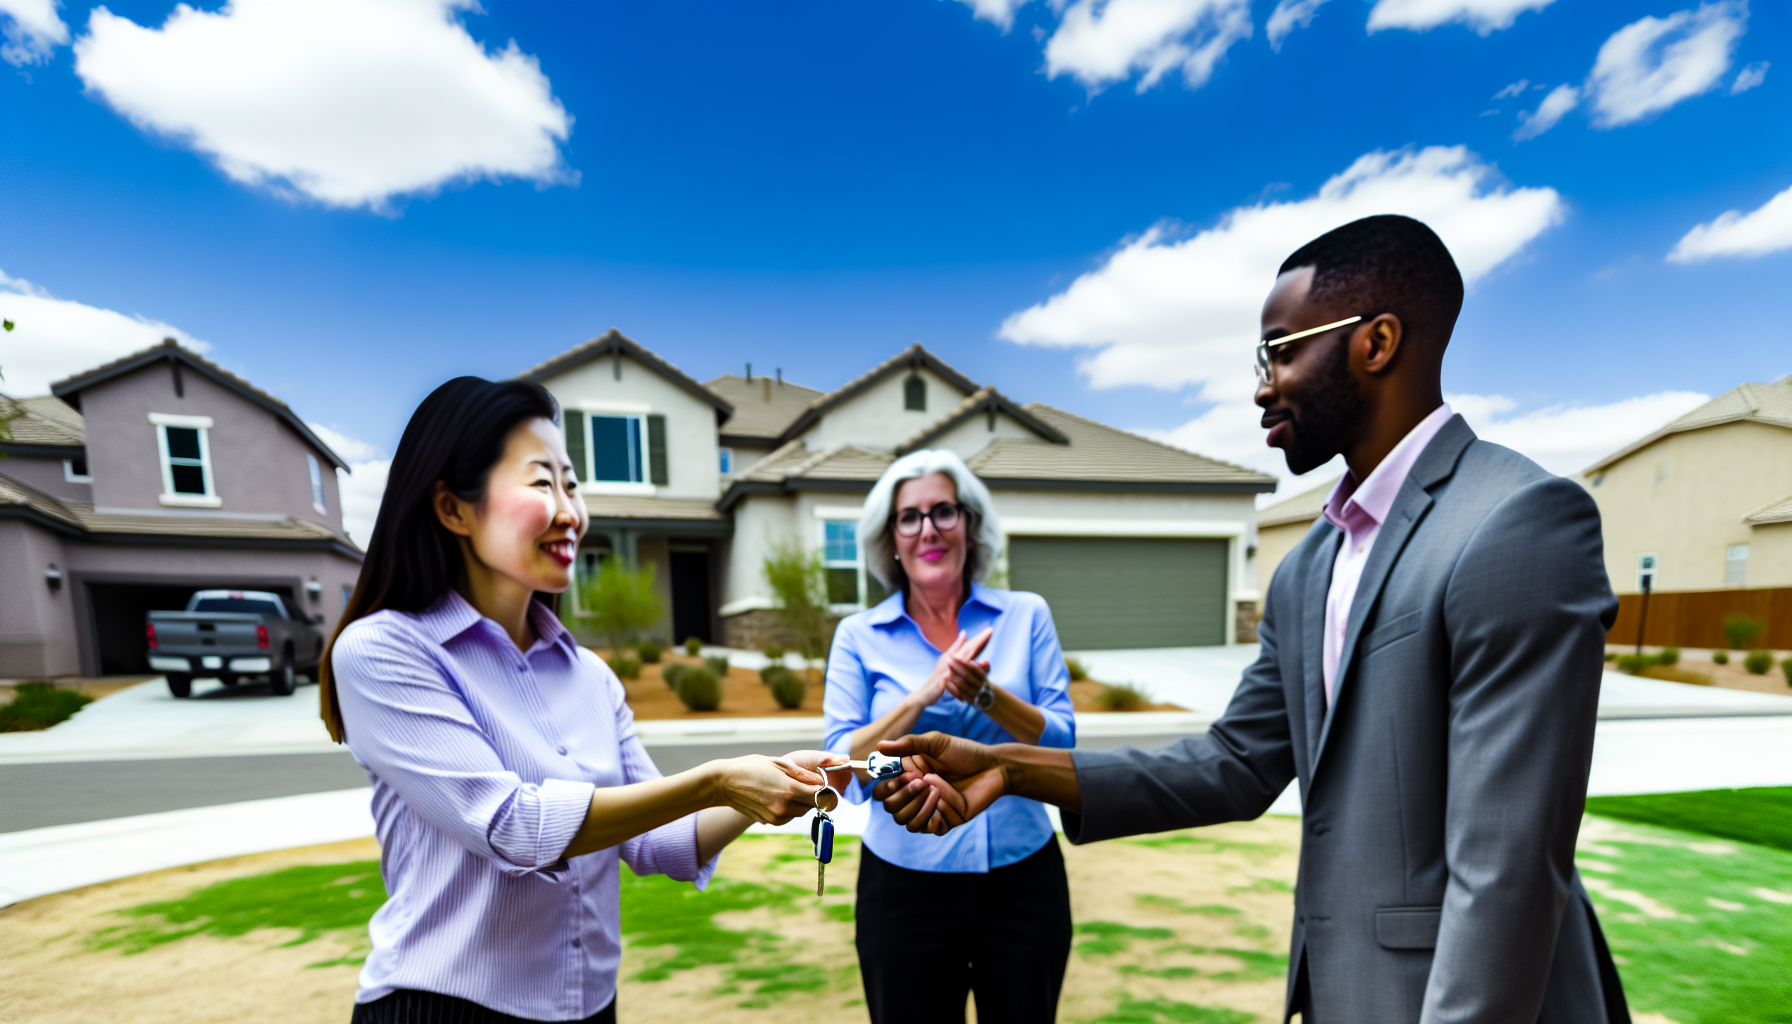 Diverse group of people shaking hands and exchanging keys in front of a new home